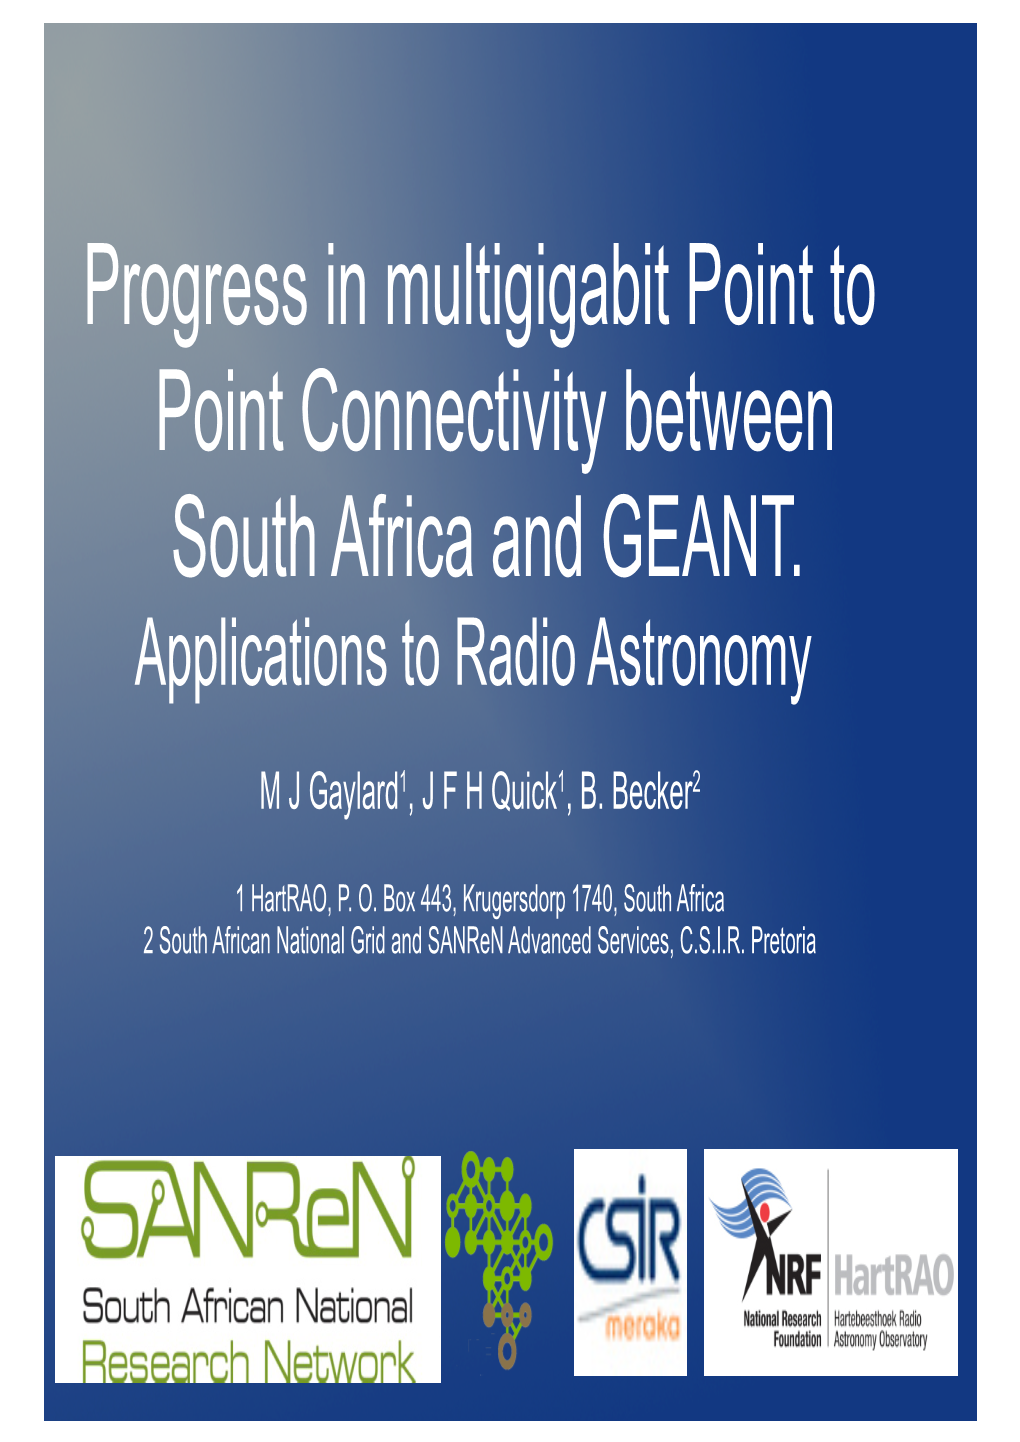 Progress in Multigigabit Point to Point Connectivity Between South Africa and GEANT